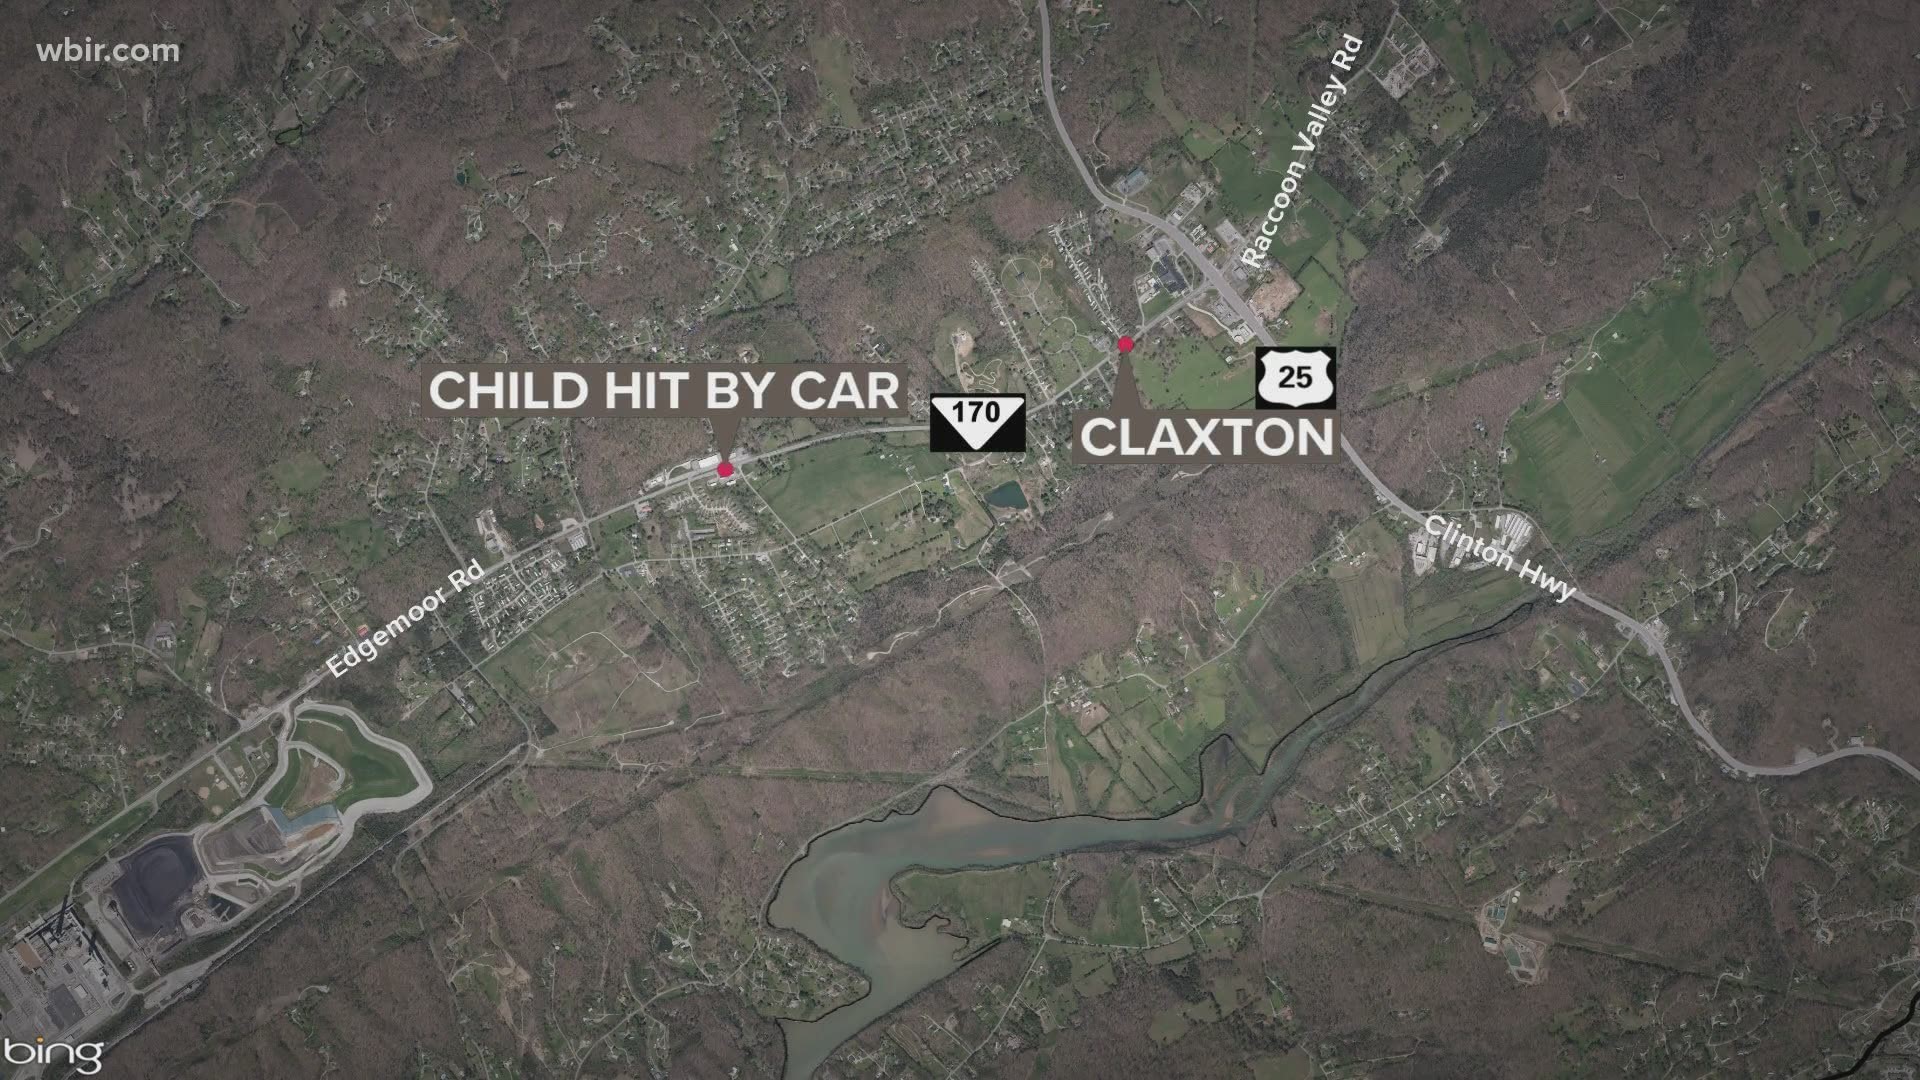 Officials said a child was hit by a vehicle in Anderson County Wednesday night.